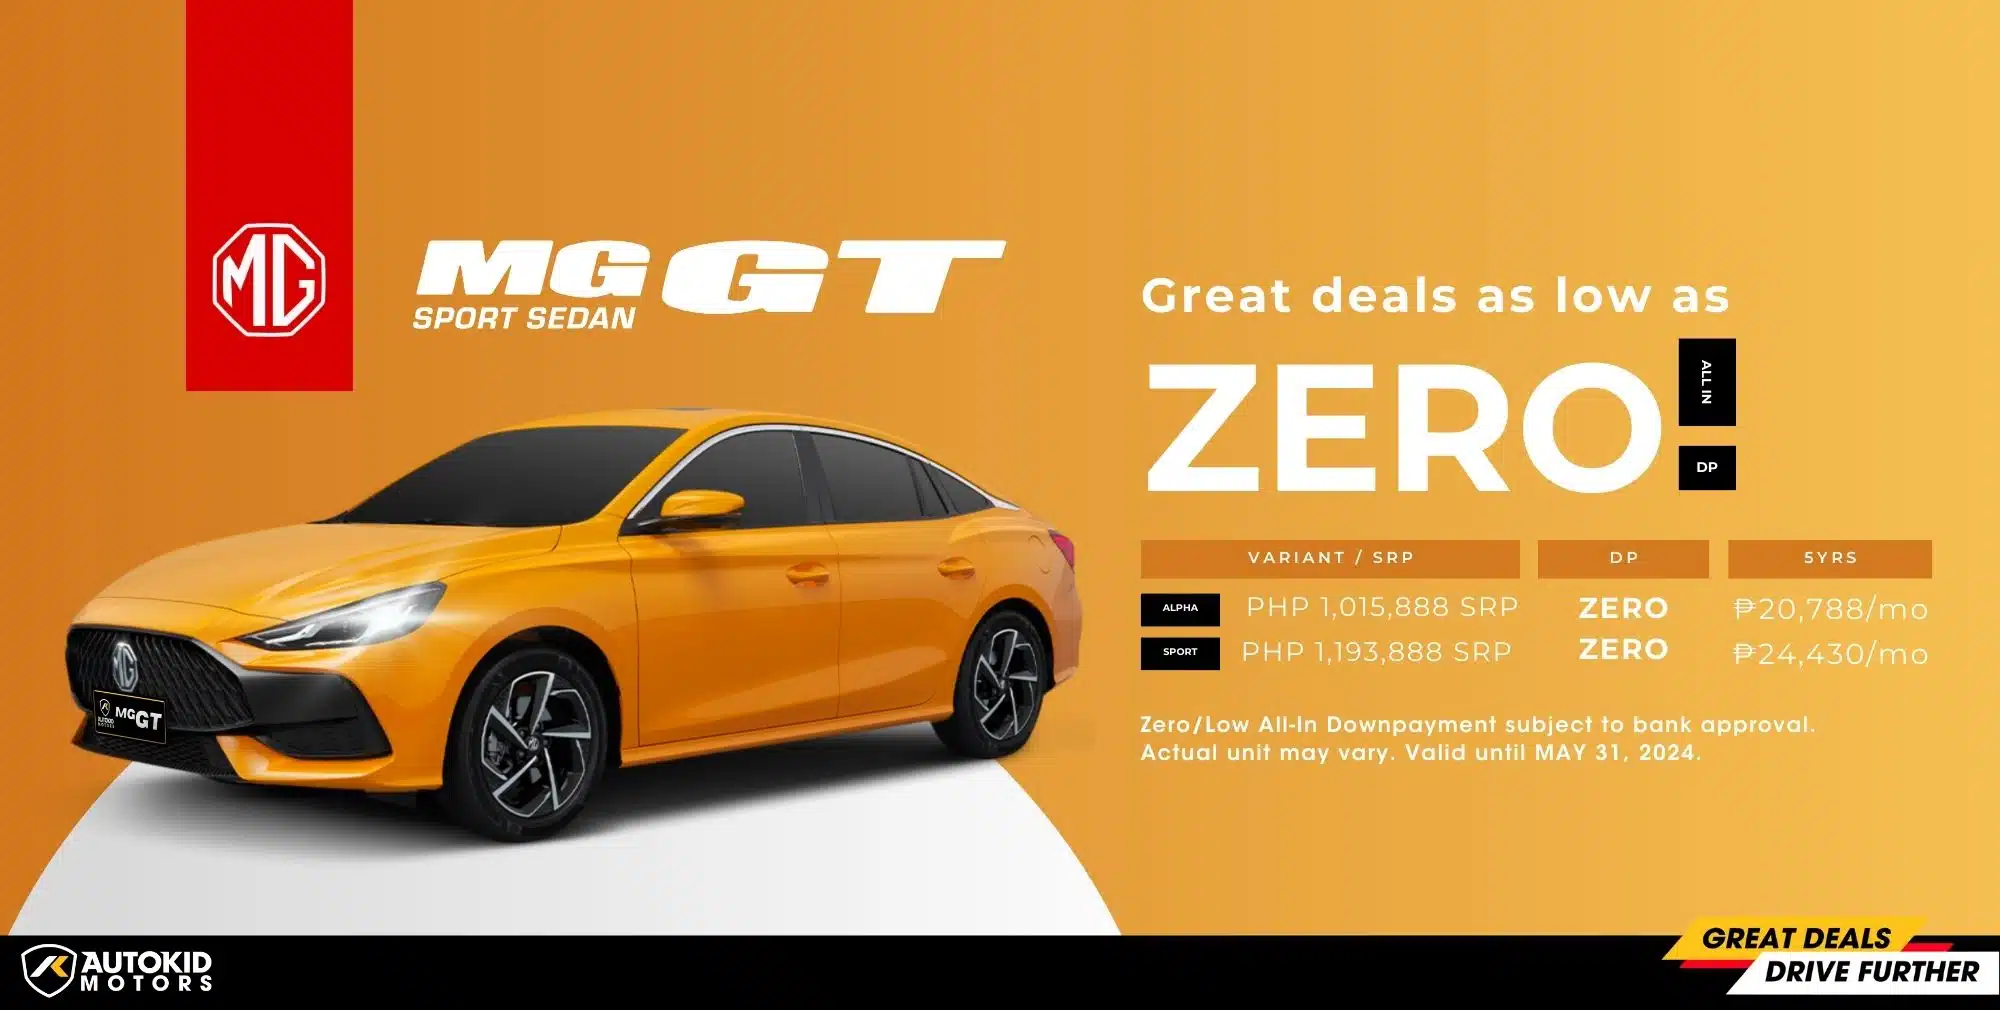 MG GT lowest down payment on car Philippines